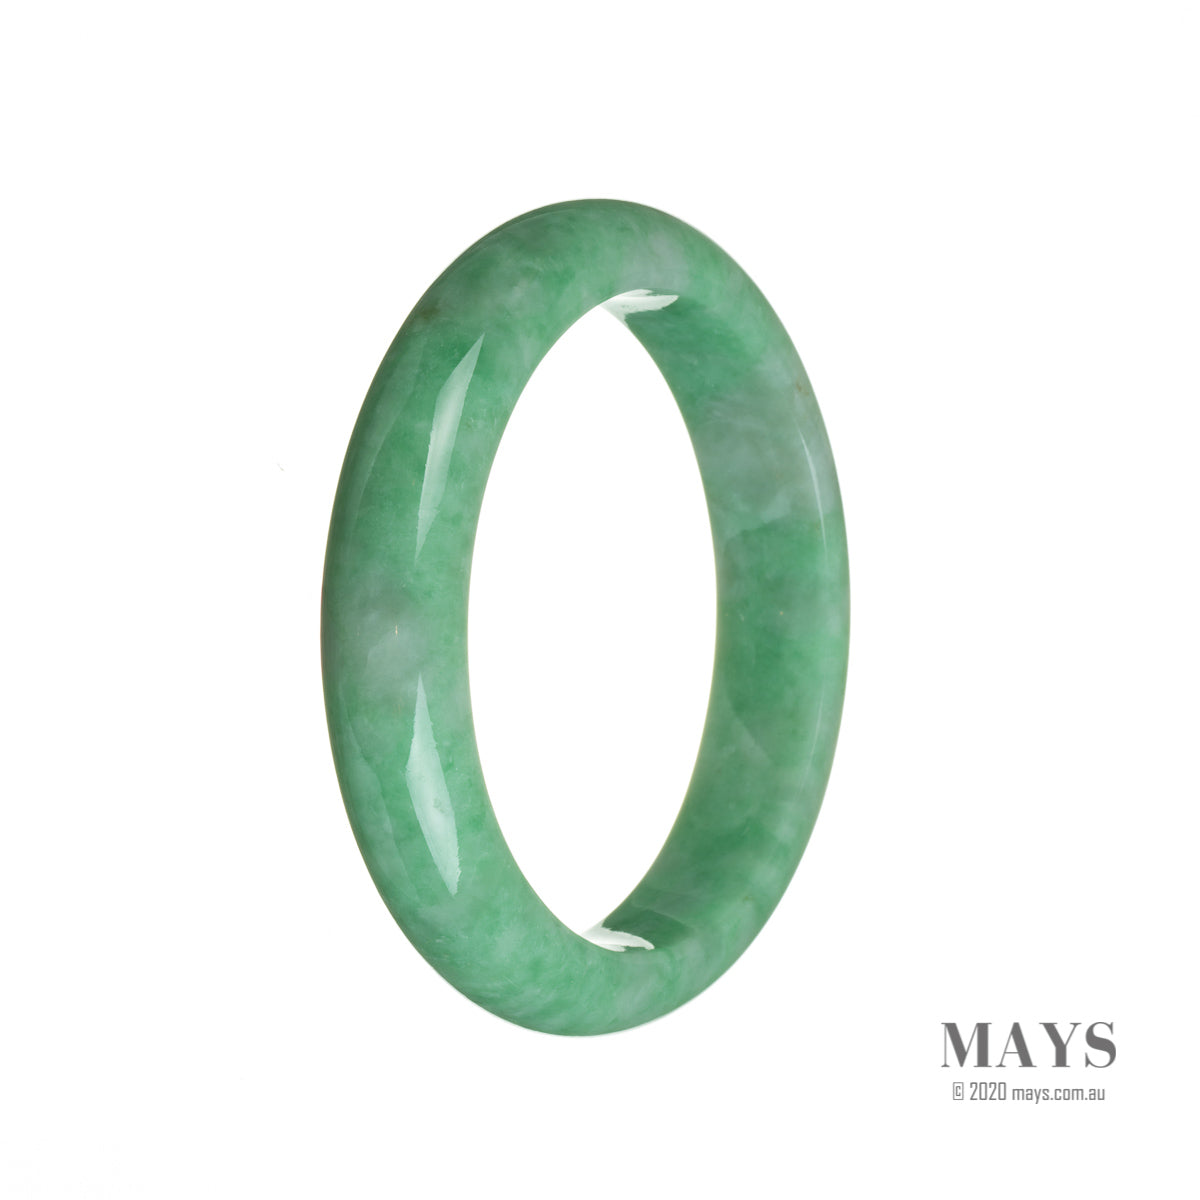 A close-up photo of a vibrant green jade bracelet with a semi-round shape, measuring 58mm in diameter. The bracelet is made of genuine Grade A jadeite jade and is being sold by MAYS GEMS.